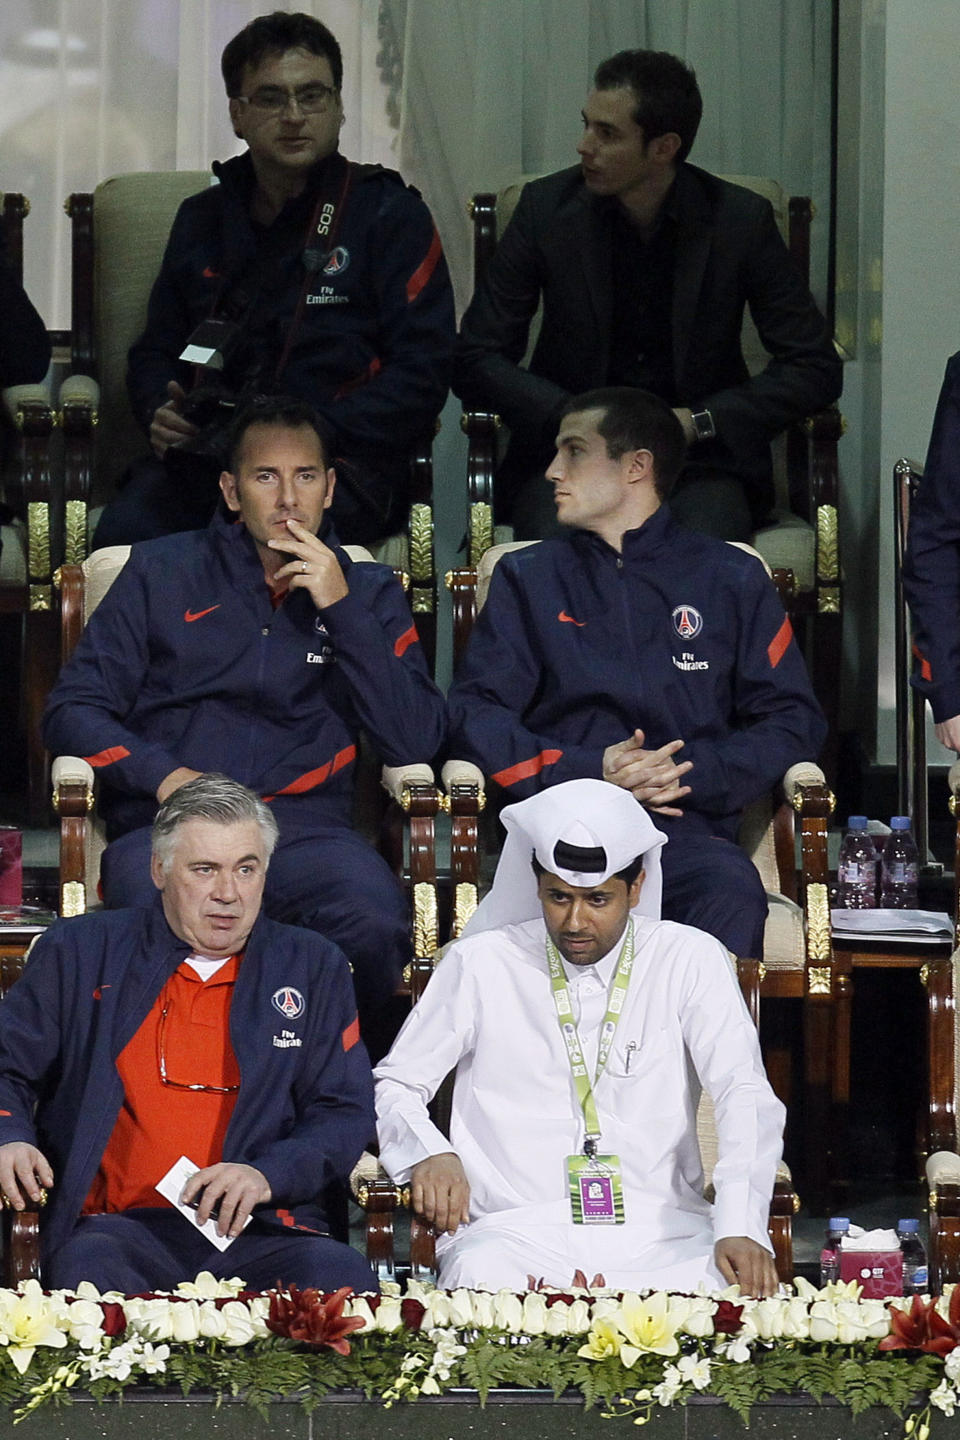 FILE - In this Jan. 2 2012 file photo, Paris Saint Germain's new coach Carlo Ancelotti of Italy, left, and president of PSG and head of the Qatar Tennis Federation, Nasser al-Khelaifi right, attend an ATP Qatar Open tennis match with the team, at the Khalifa Tennis and Squash Complex in Doha. Qatar, with the world's third-largest gas reserves, has been on a spending spree in France and elsewhere in the West in recent years. The oil-rich state less than the size of Connecticut has exerted an outsized influence as a global bankroller, putting it at the cutting edge of an accelerating power shift between traditional Western powers and emerging economies. As Europe is engulfed in crisis, Qatar has been on a global spending spree, buying stakes in luxury brands, acquiring soccer club Paris St. Germain and financing London's "Shard" , the EU's tallest building. Now, to the consternation of the French, the emirate wants to make a major humanitarian investment in the West. (AP Photo, File)